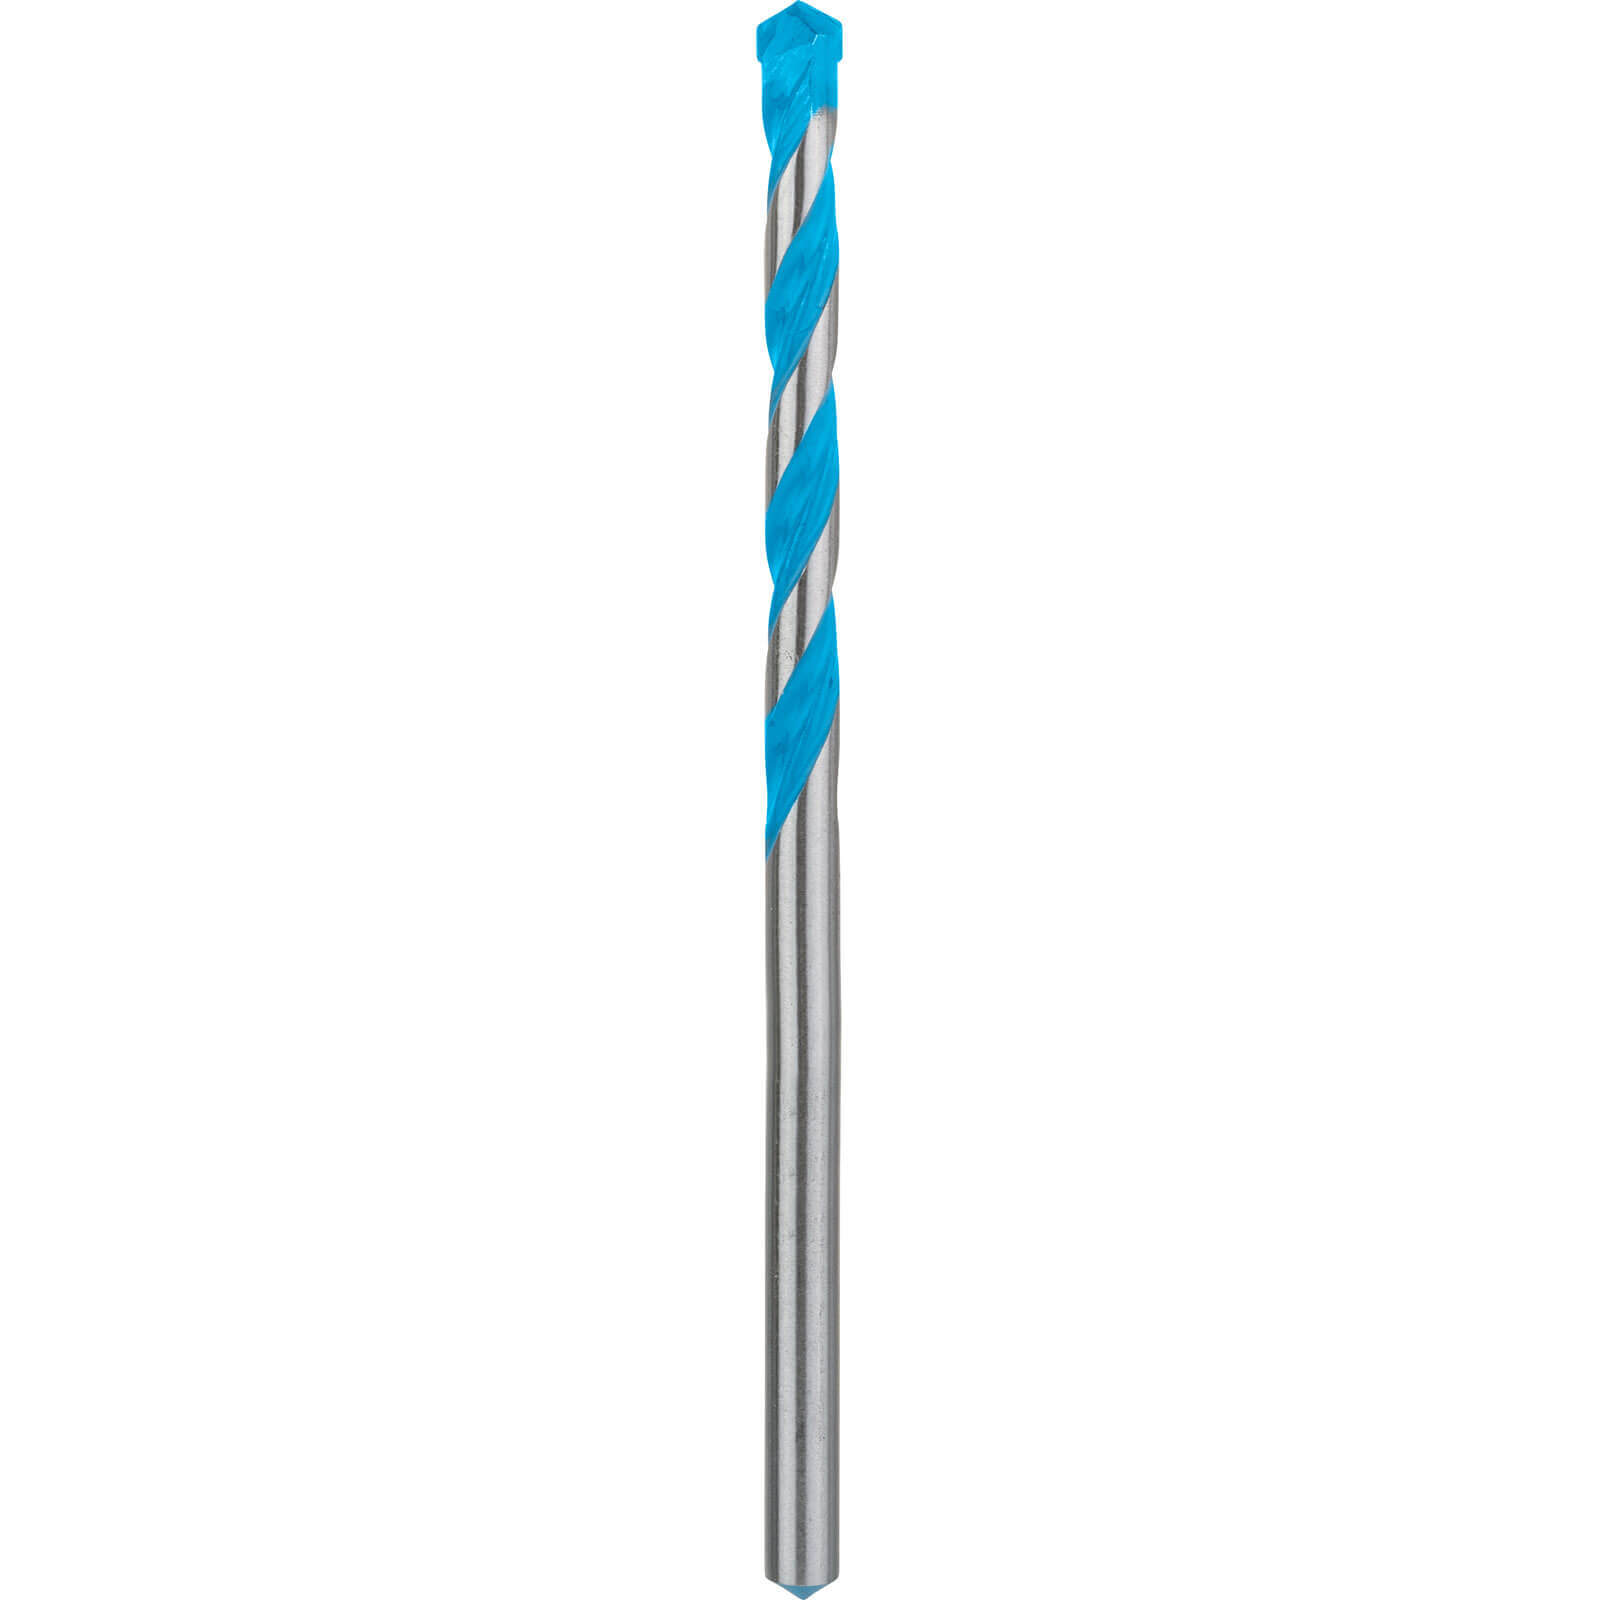 Image of Bosch Expert CYL-9 Multi Construction Drill Bit 8mm 150mm Pack of 1